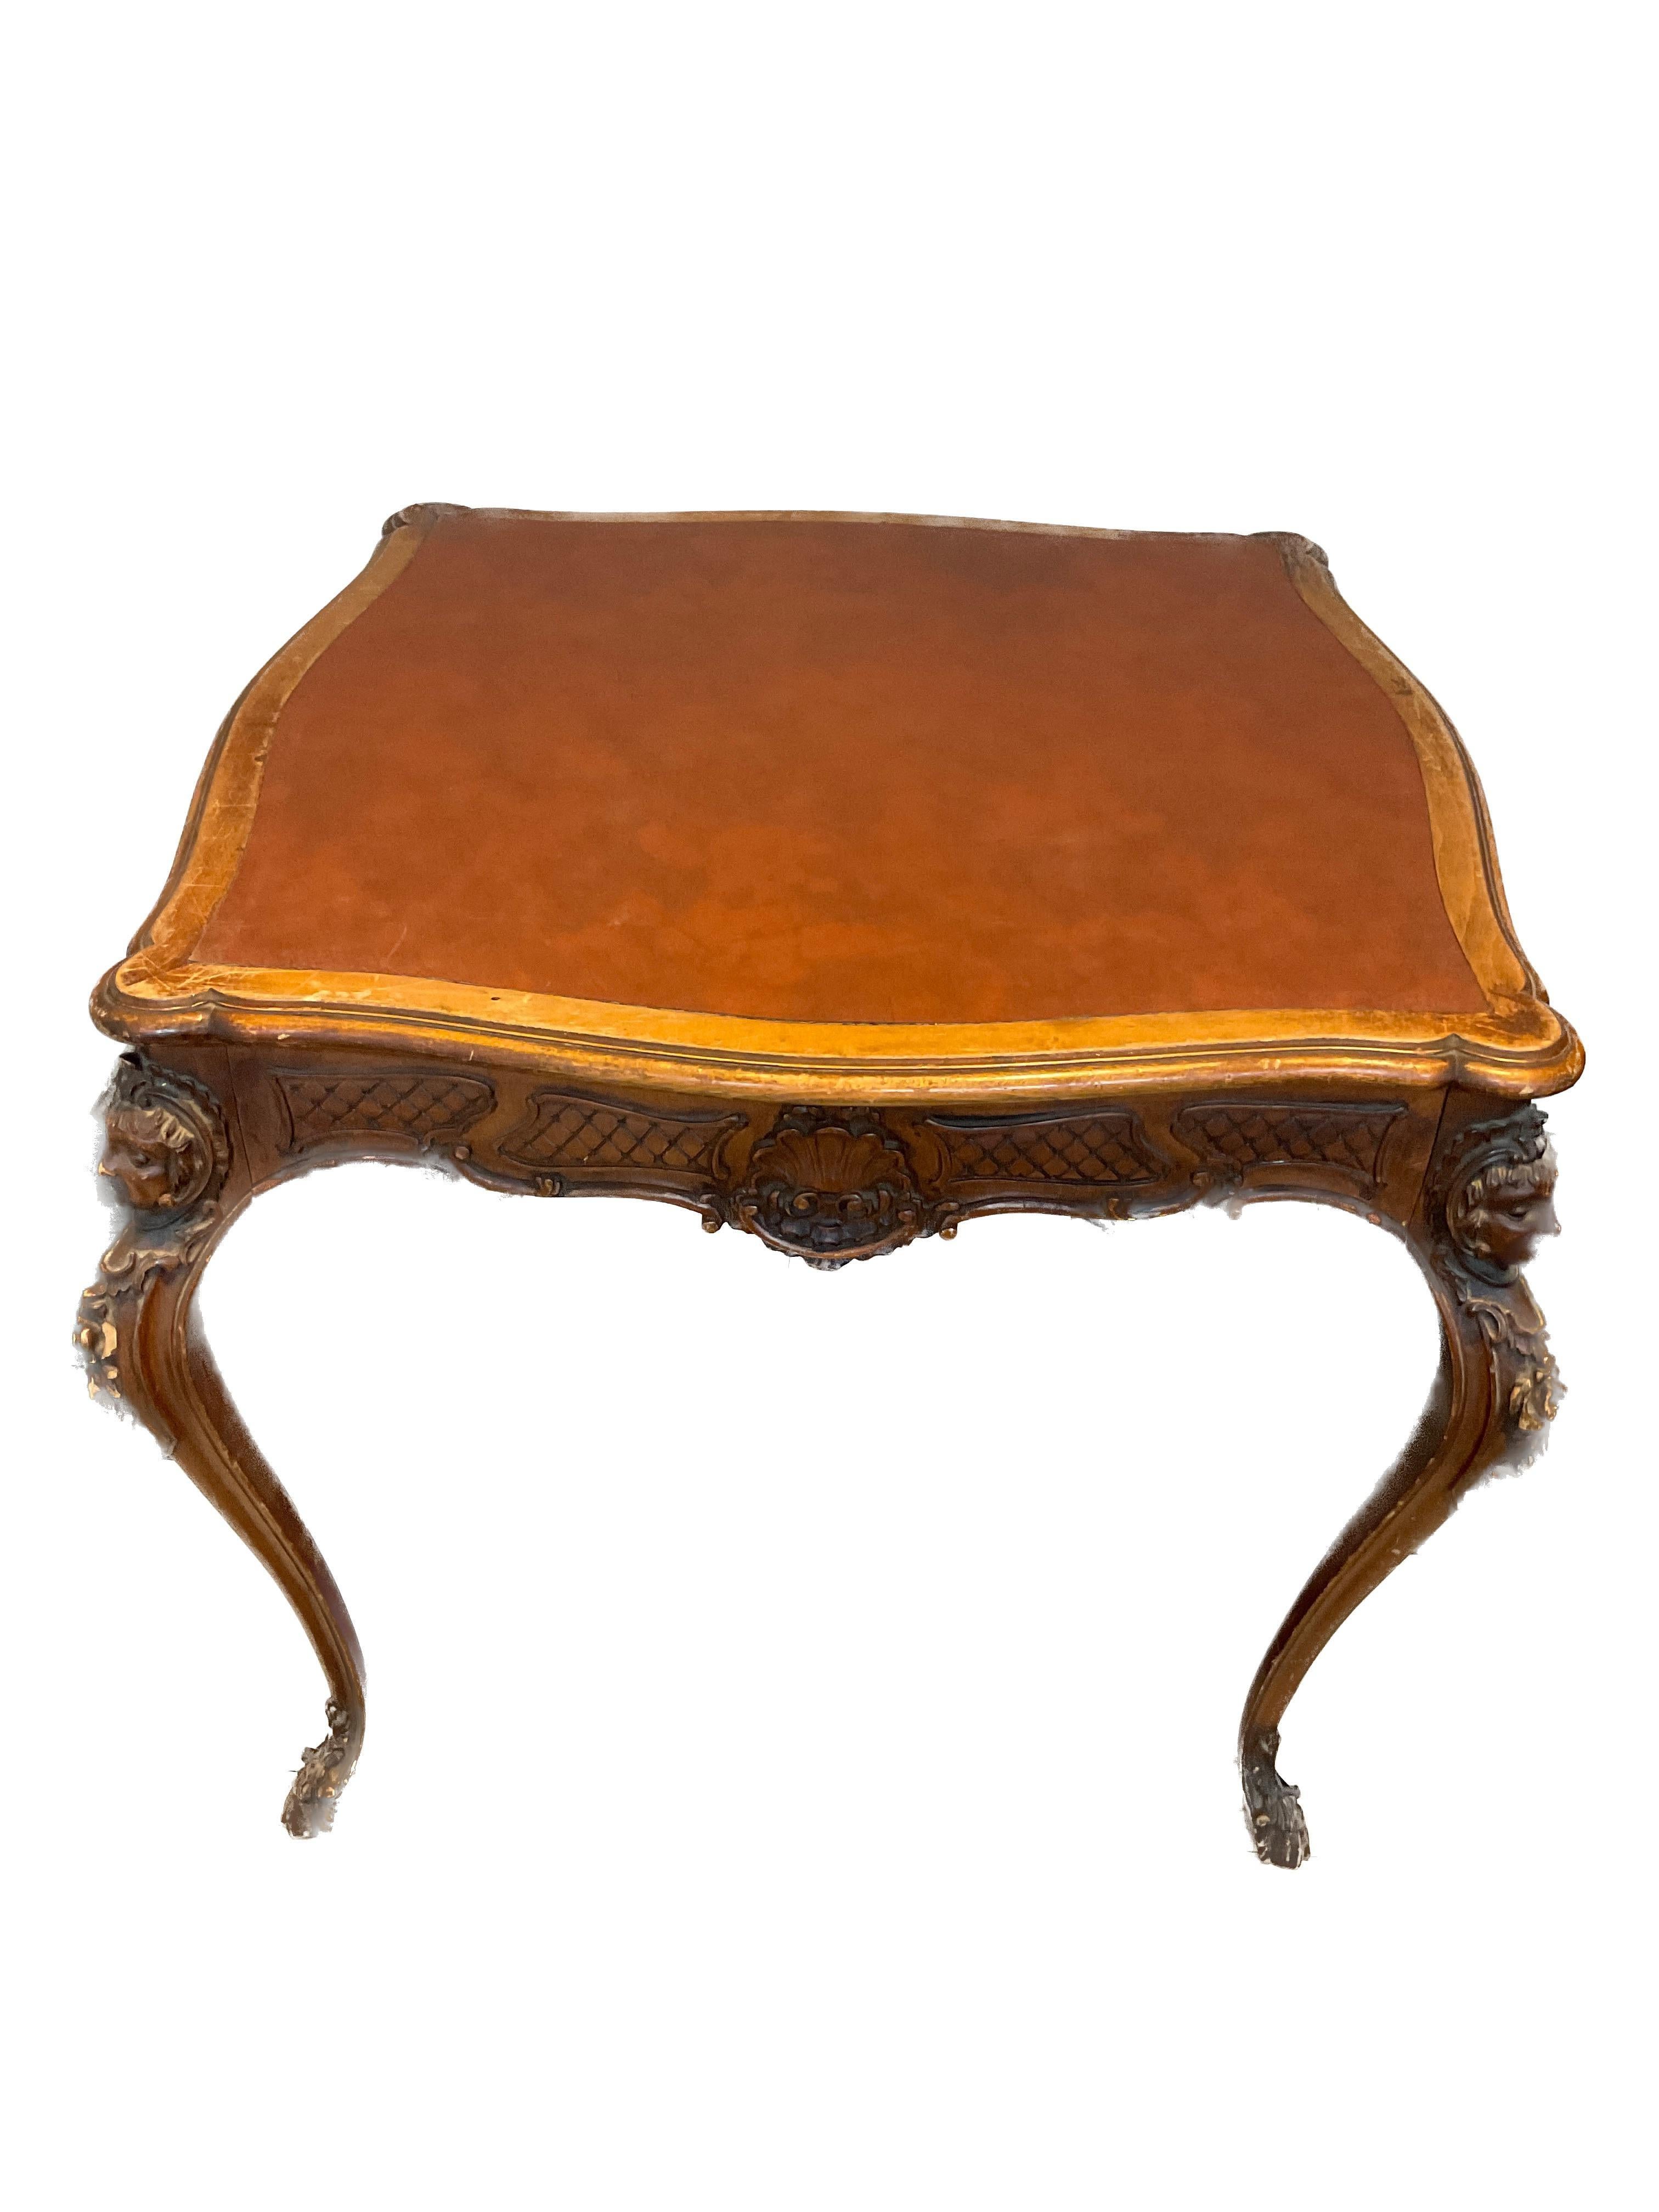 1950s Carved wood Rococo game table. Leather top. Made in Italy. Used on the TV show The Marvelous Mrs. Maisel.